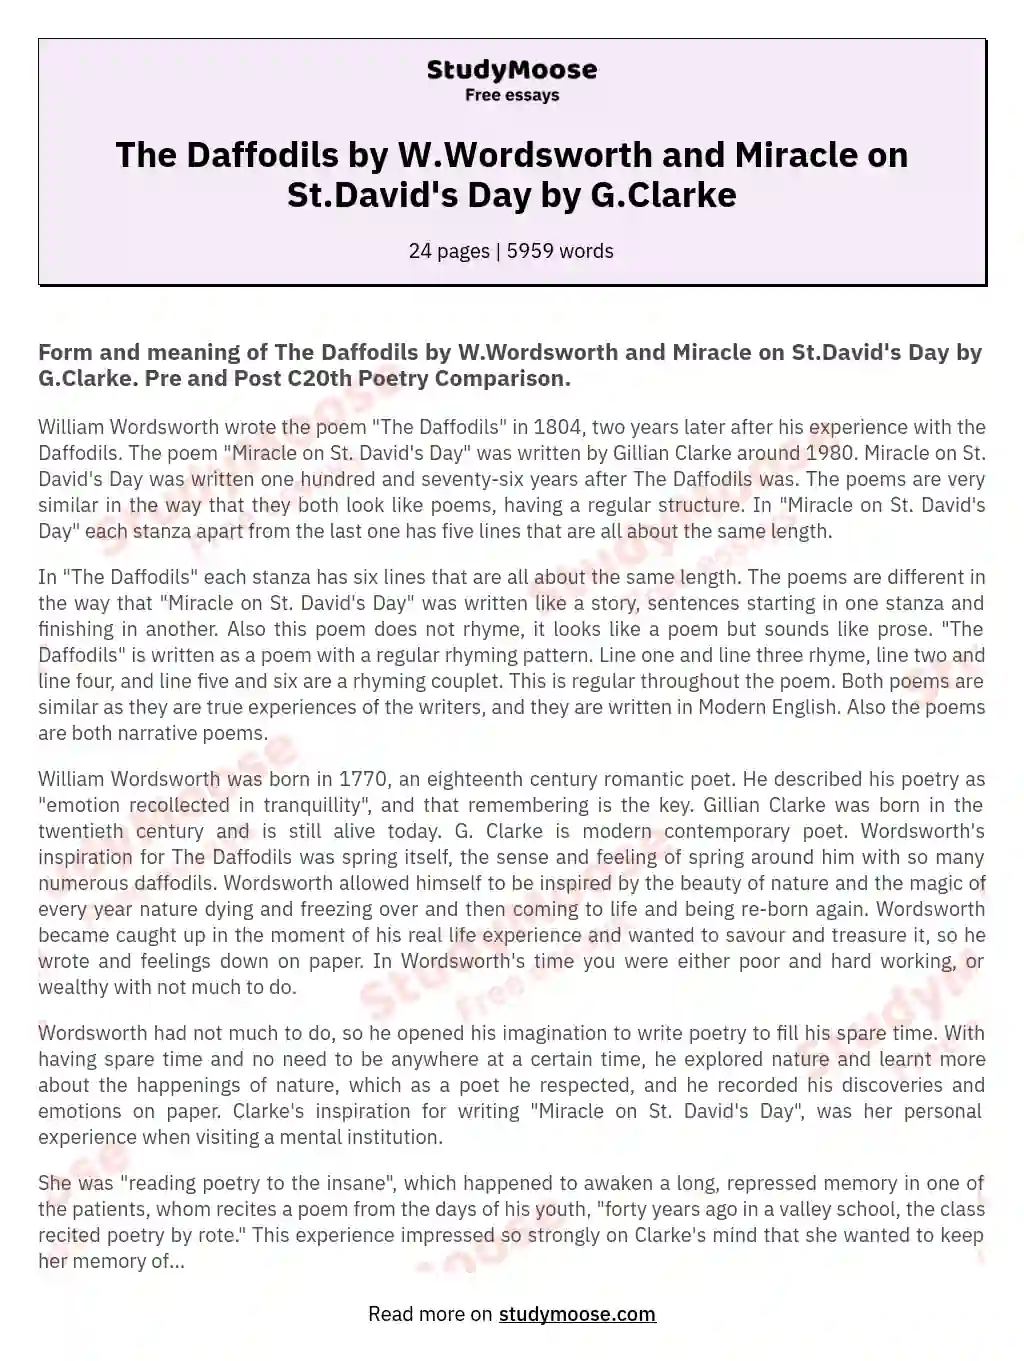 The Daffodils by W.Wordsworth and Miracle on St.David's Day by G.Clarke essay